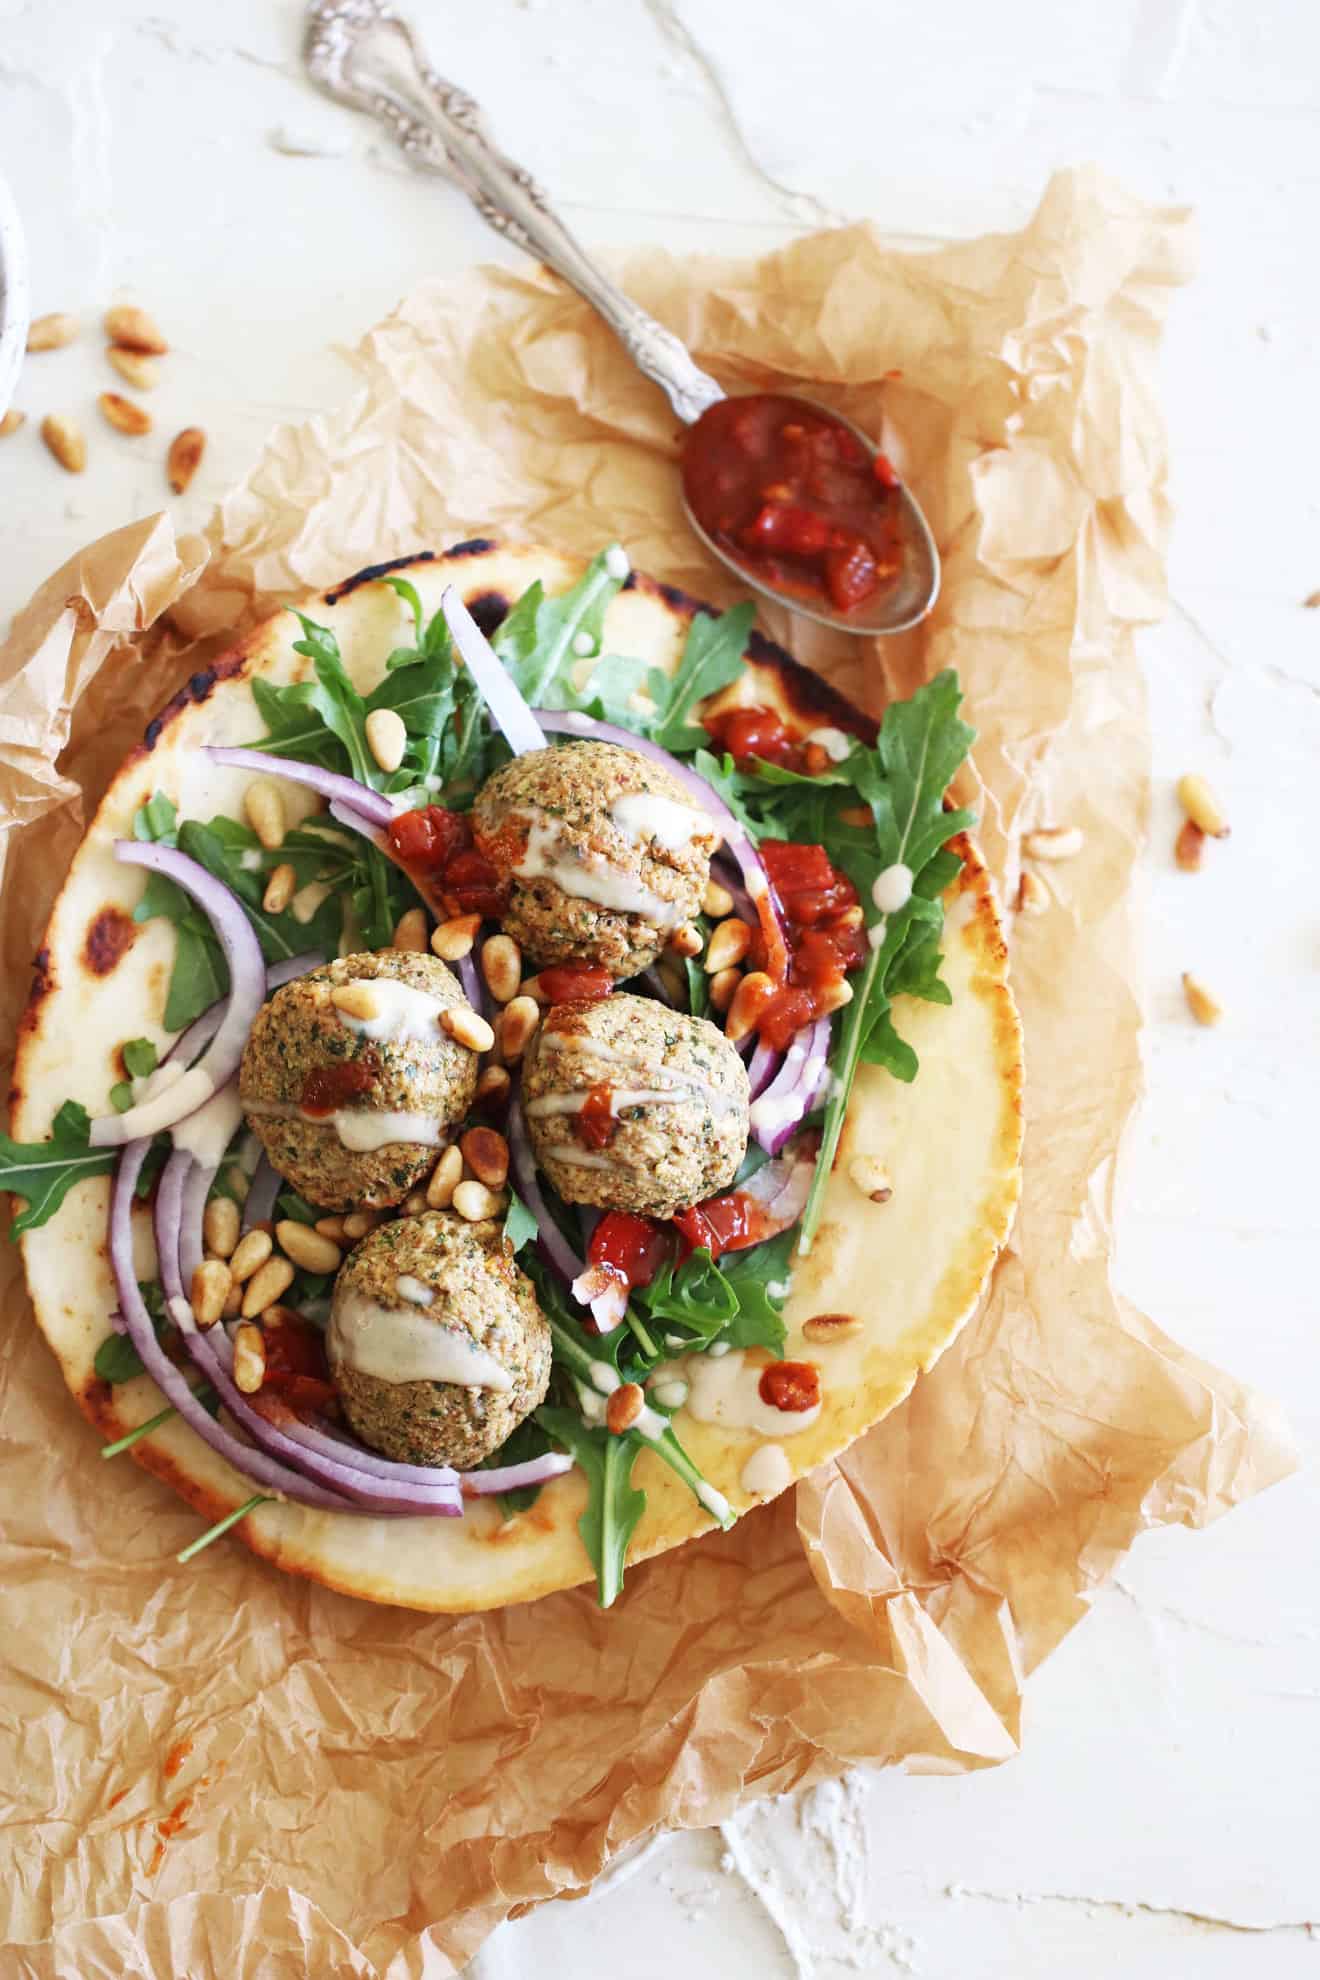 Homemade Baked Falafel without Chickpeas